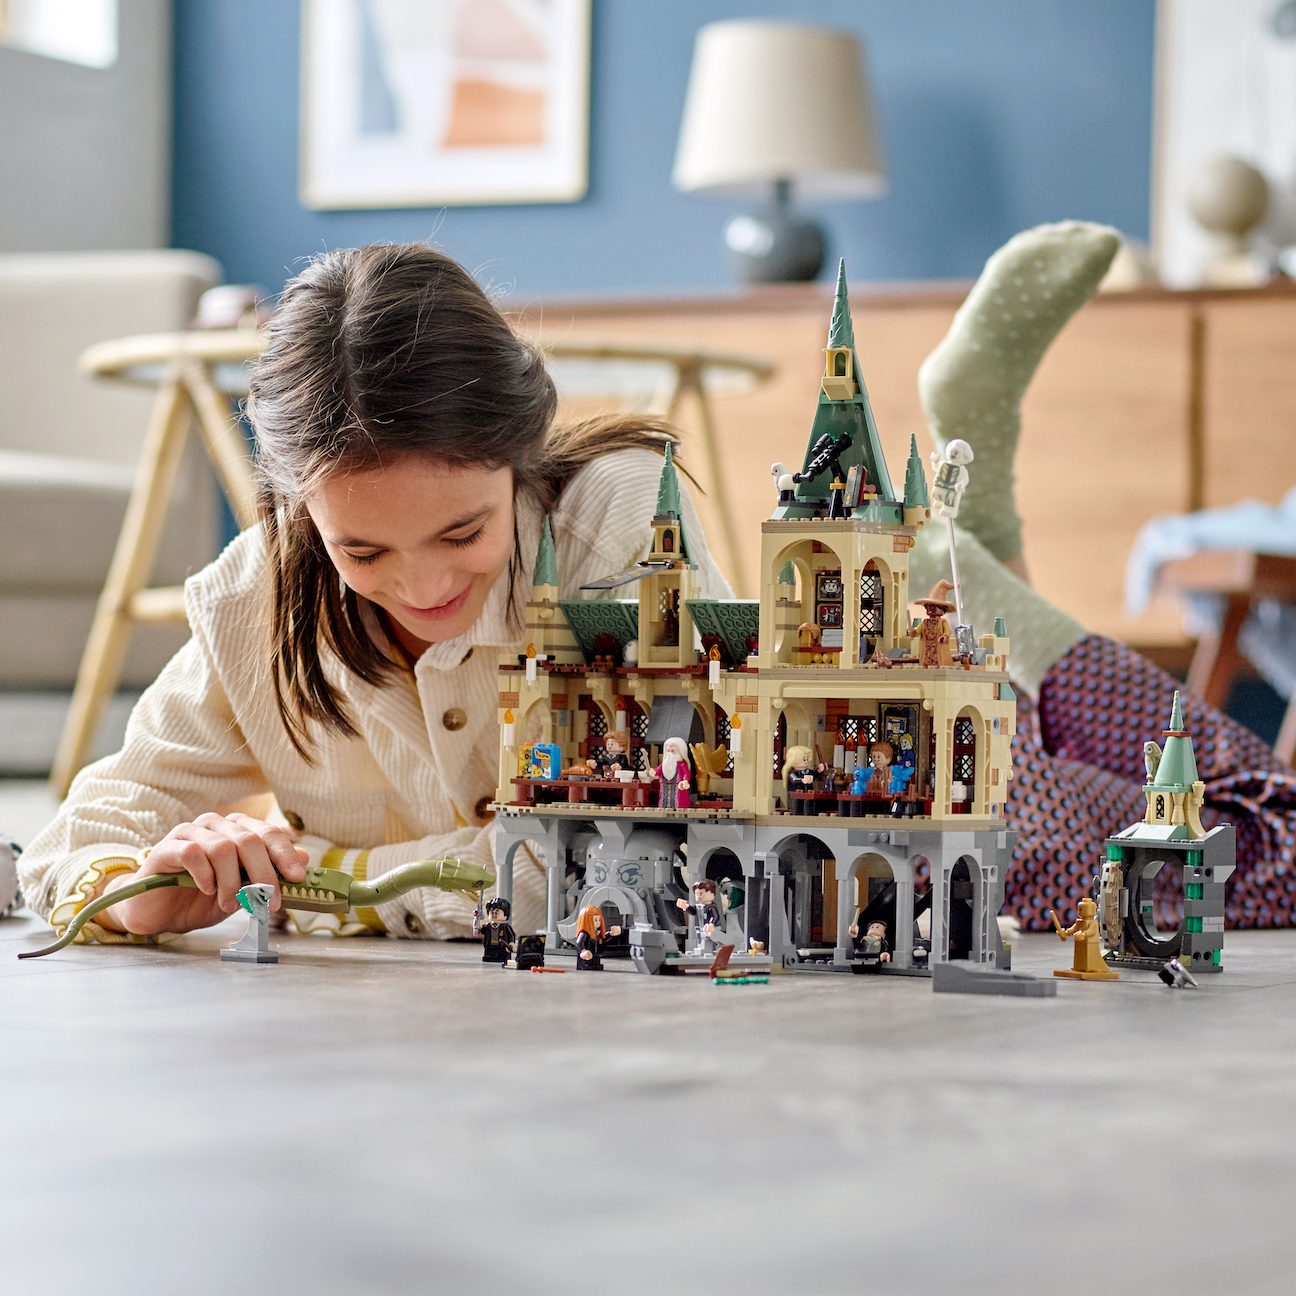 IN PHOTOS: New Harry Potter Lego sets feature scenes from ‘Chamber of Secrets’